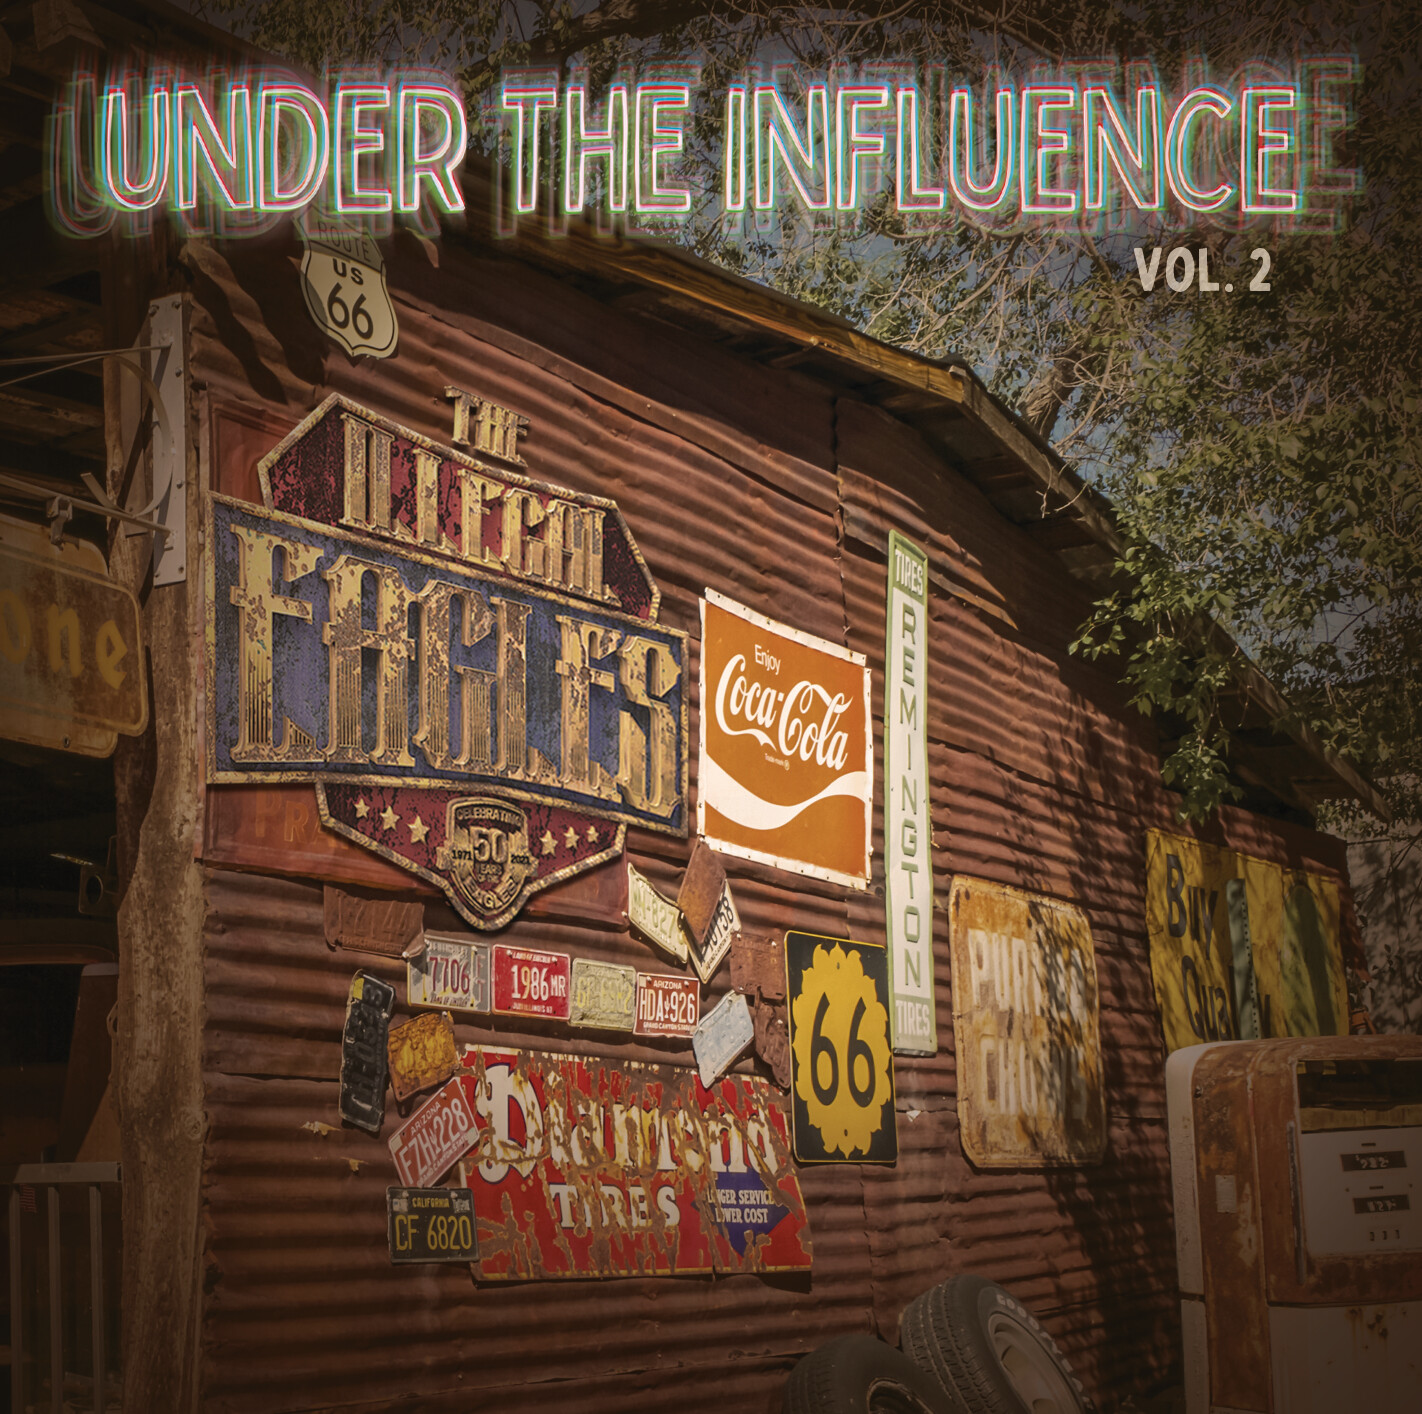 NEW! - UNDER THE INFLUENCE - NEW CD Album Vol 2